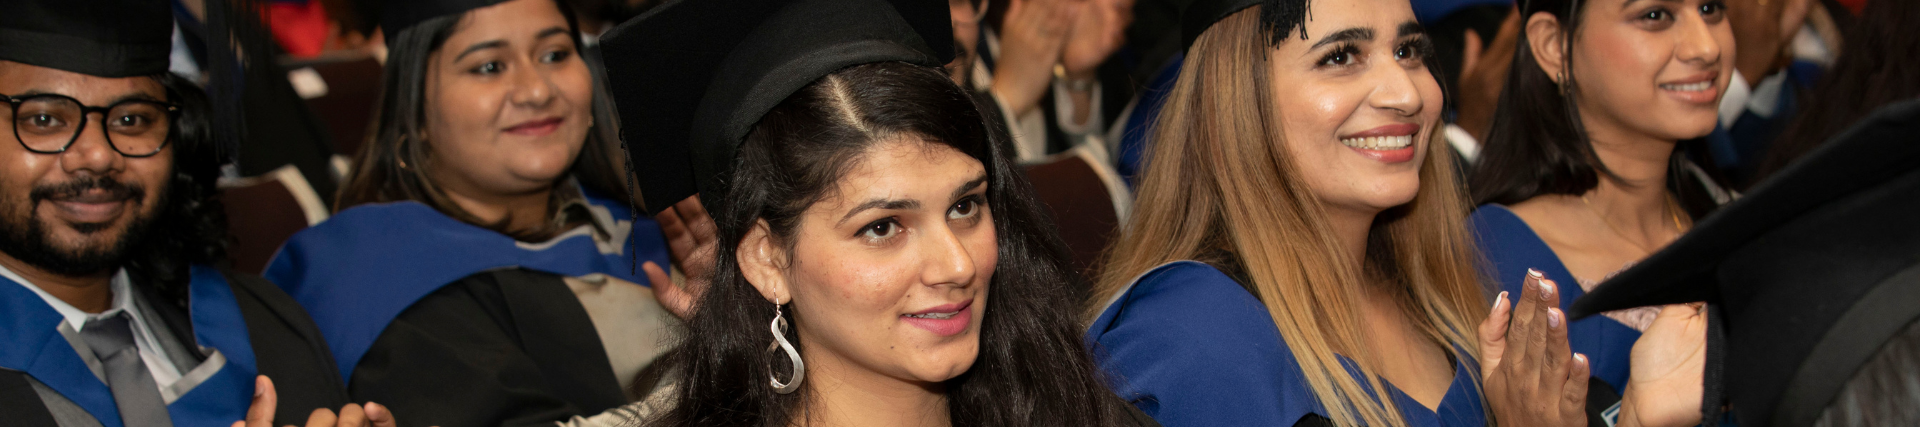 Graduates sitting and smiling at the University of West London's graduation ceremony